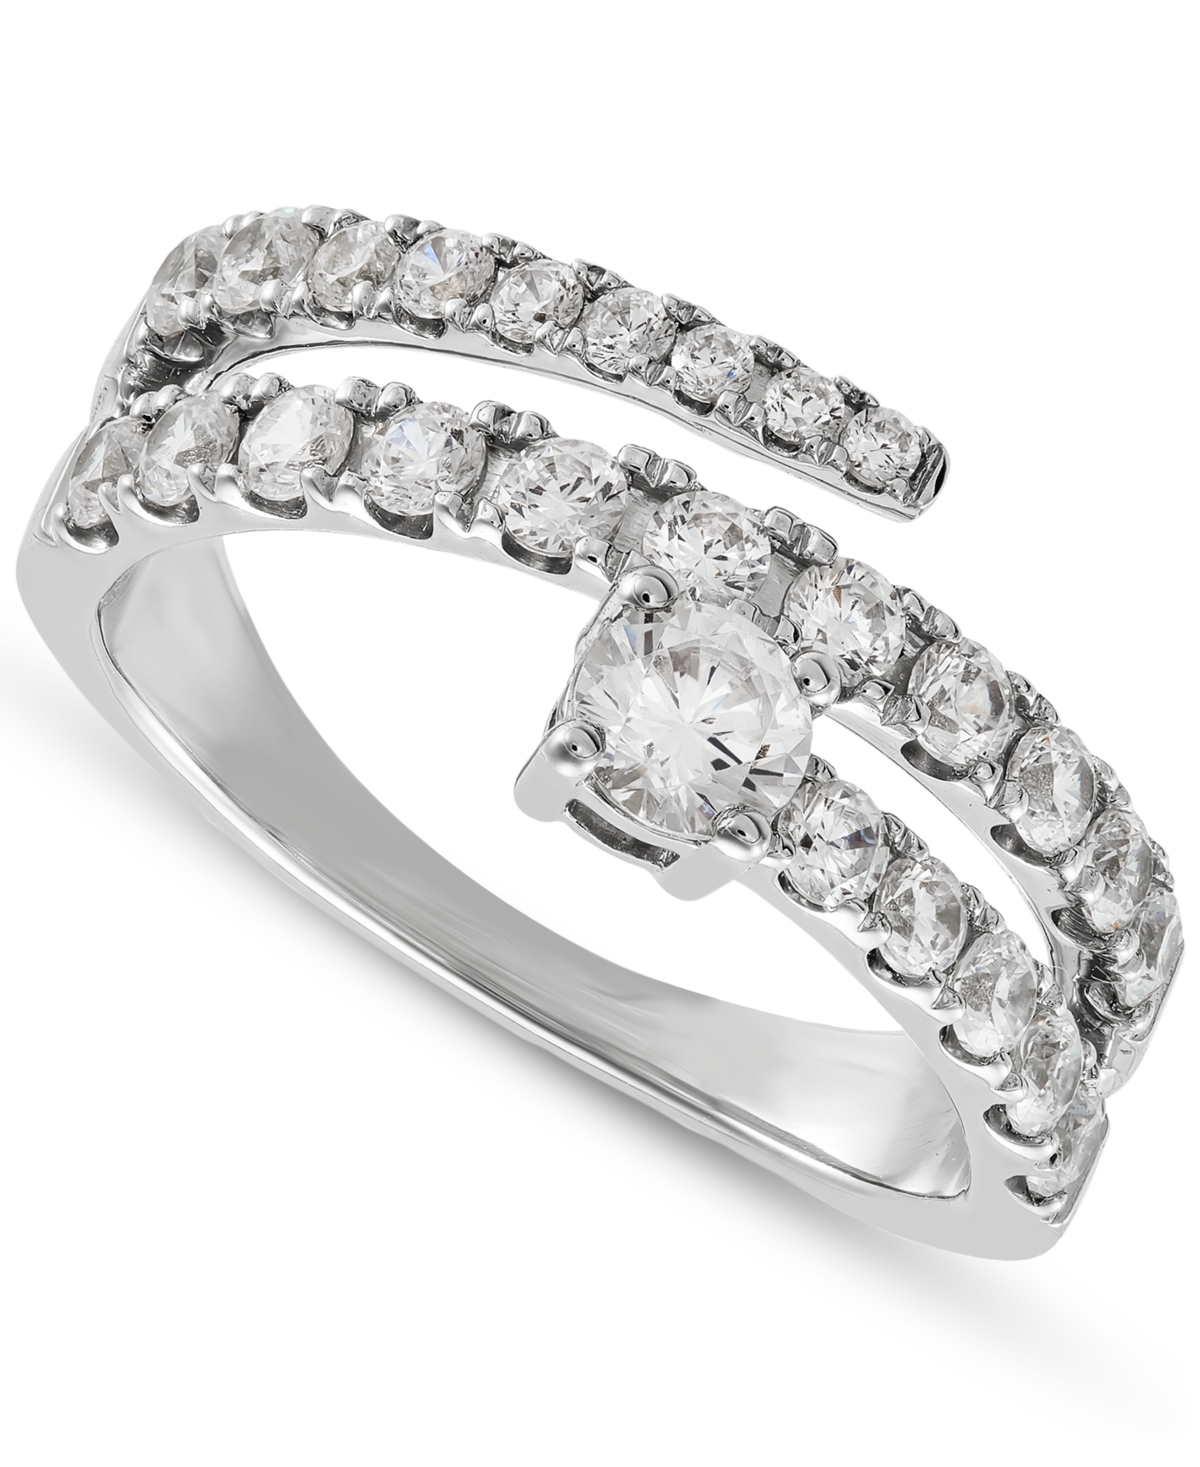 Lab Grown Diamond Coil Ring (1-1/4 ct. t.w.) in 14k White Gold - White Gold